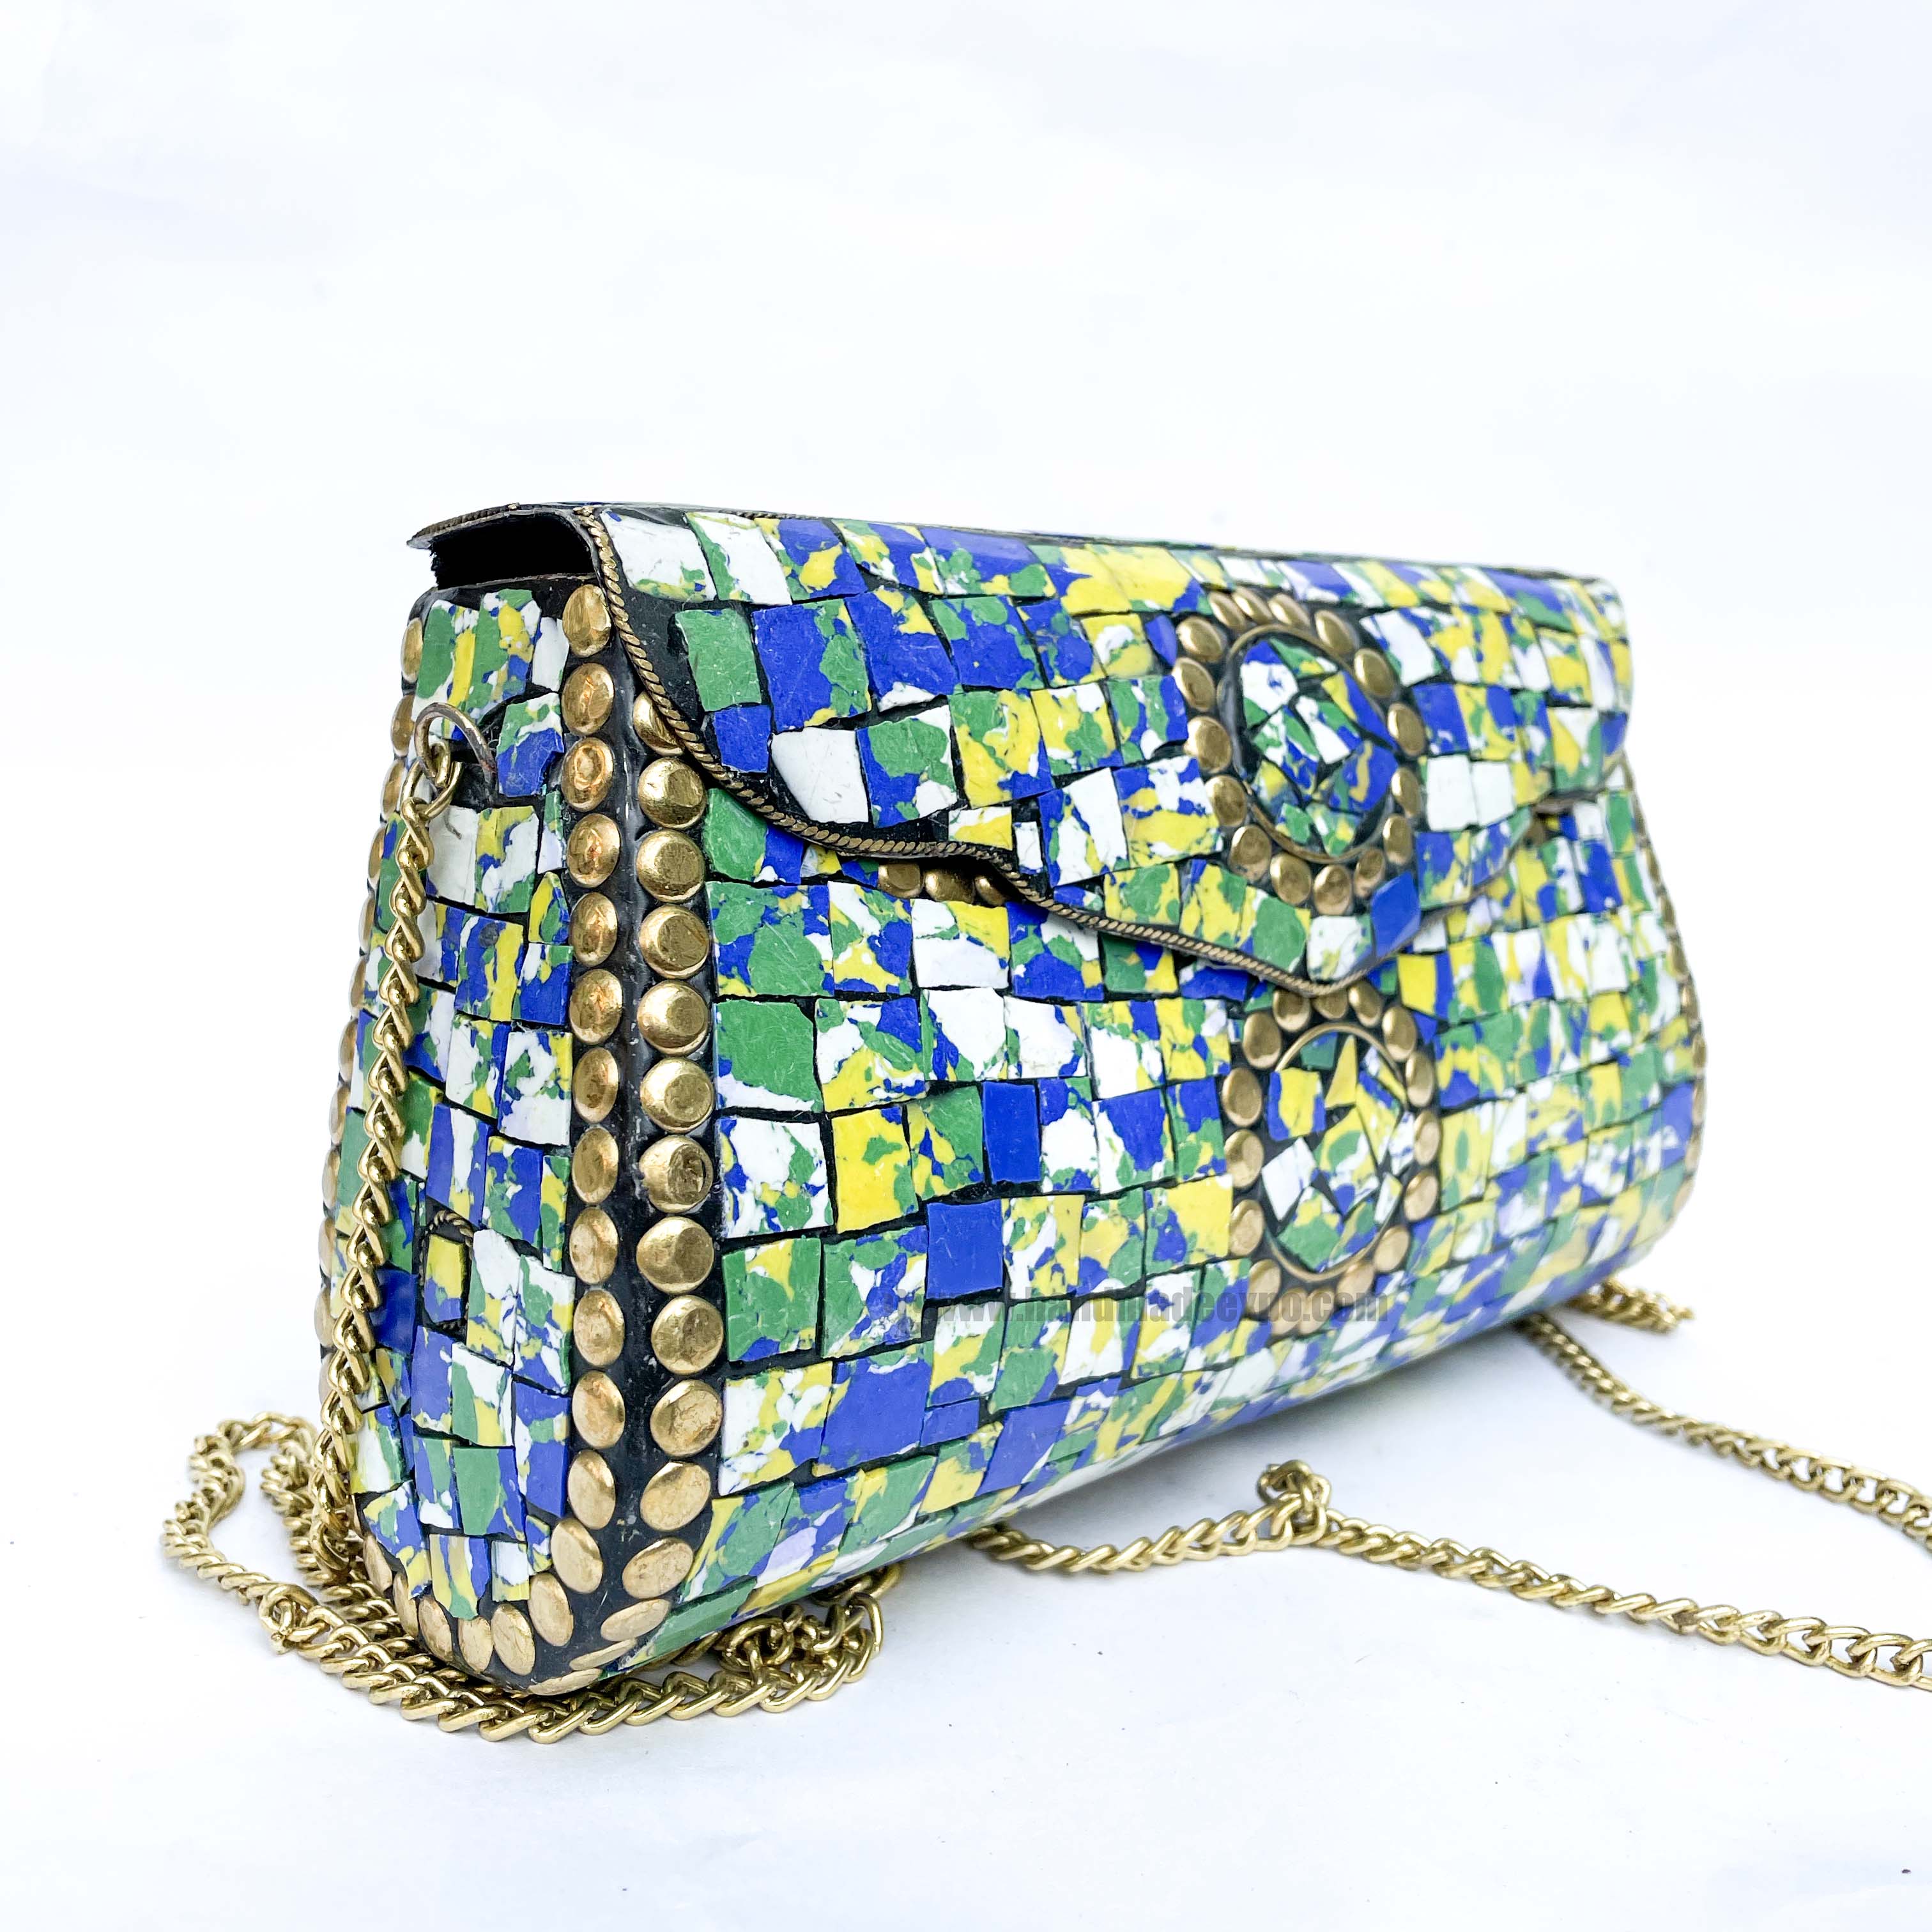 Nepali Handmade Large Size Ladies Bag With stone Setting, metal, green, Yellow And Blue Color